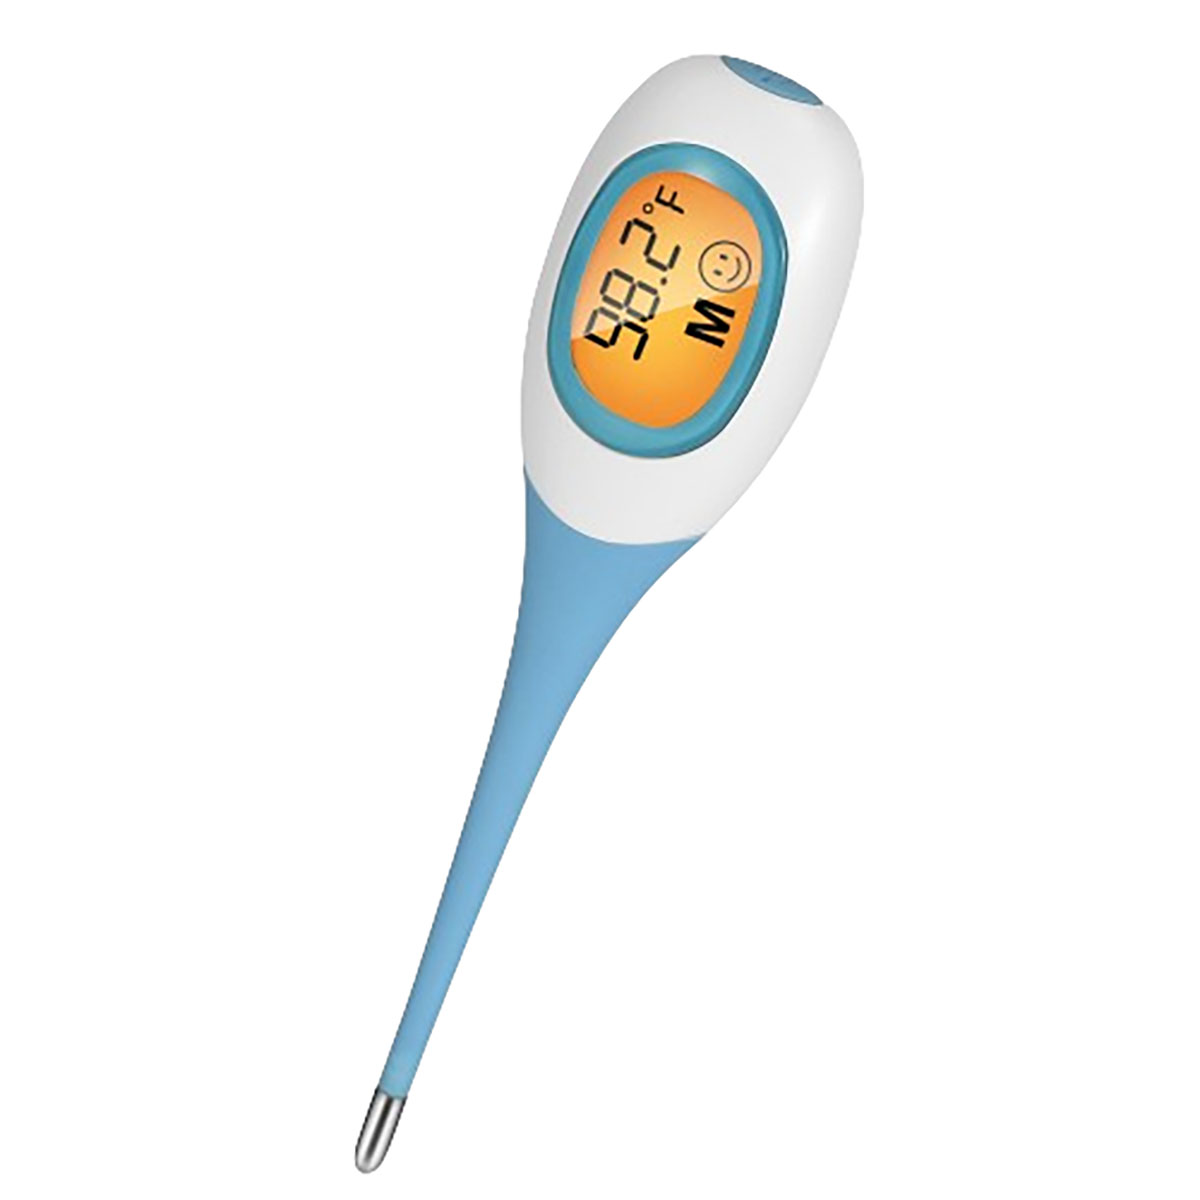 Photos - Thermometer / Barometer GPCT LCD Oral Digital Thermometer - Digital Thermometer BLUE HGDIGITALTHEM